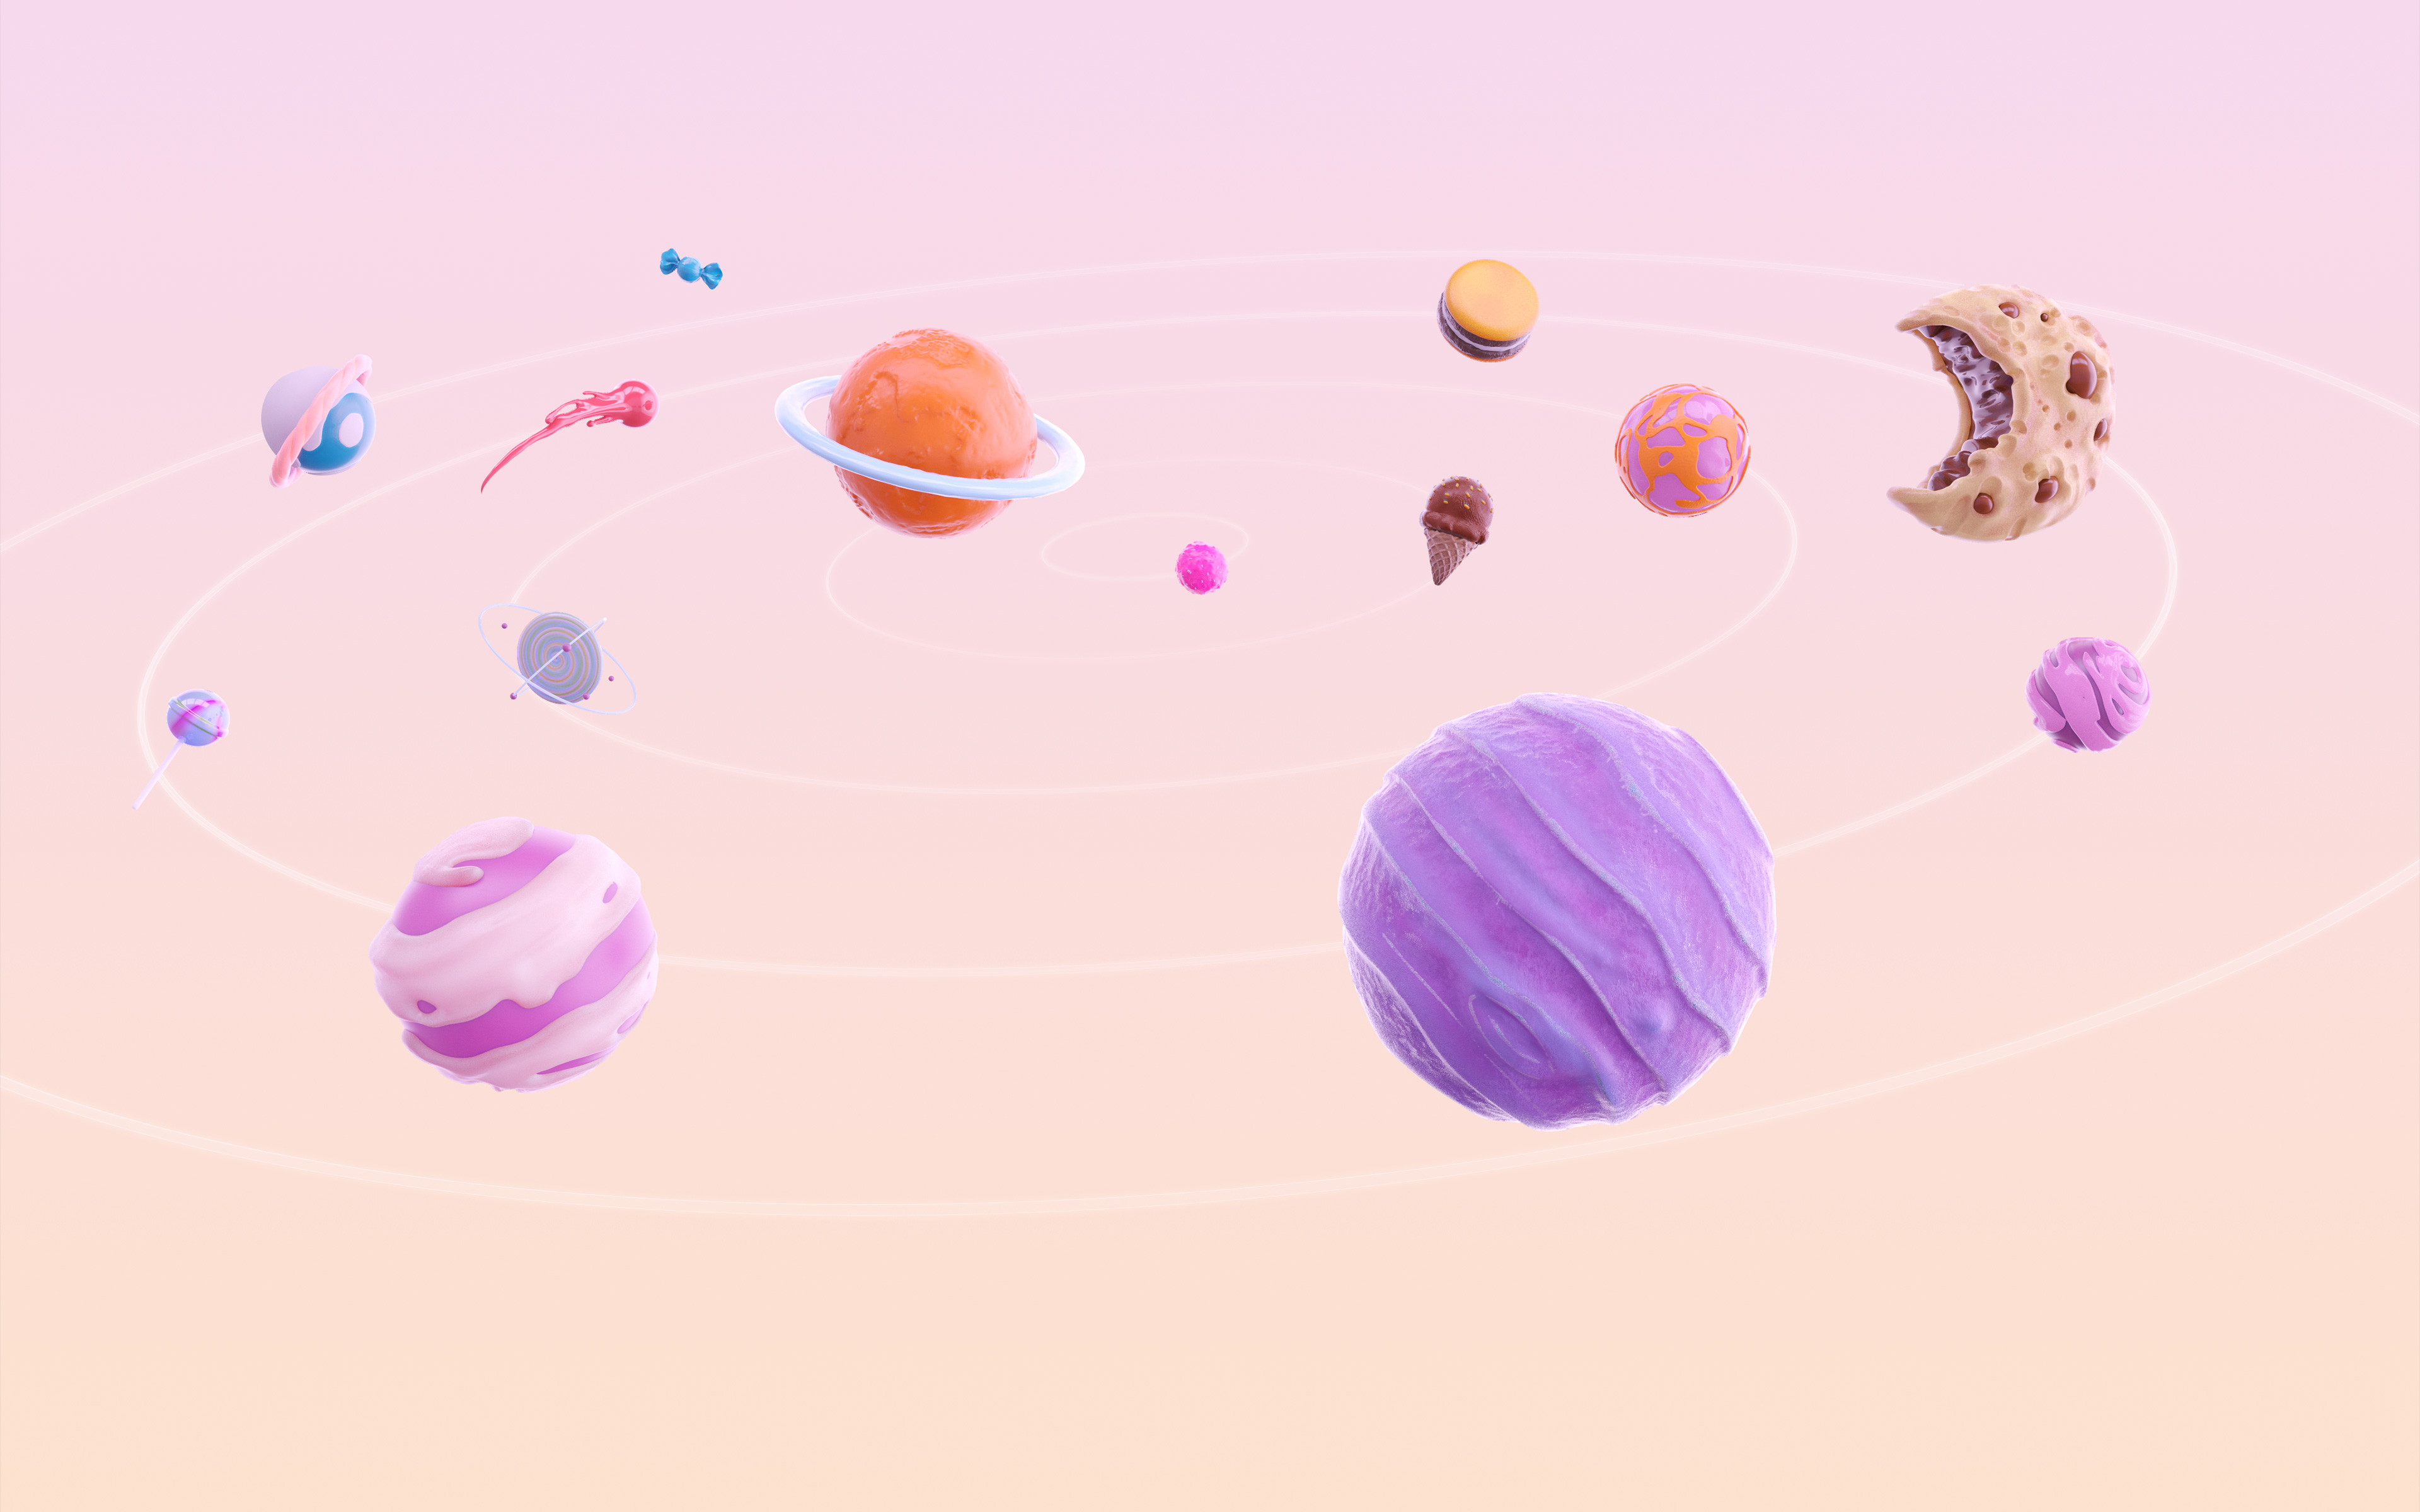 Simple Background Artwork Minimalism Humor Planet Solar System Ice Cream Candy Sweets Cookies Sphere 3840x2400